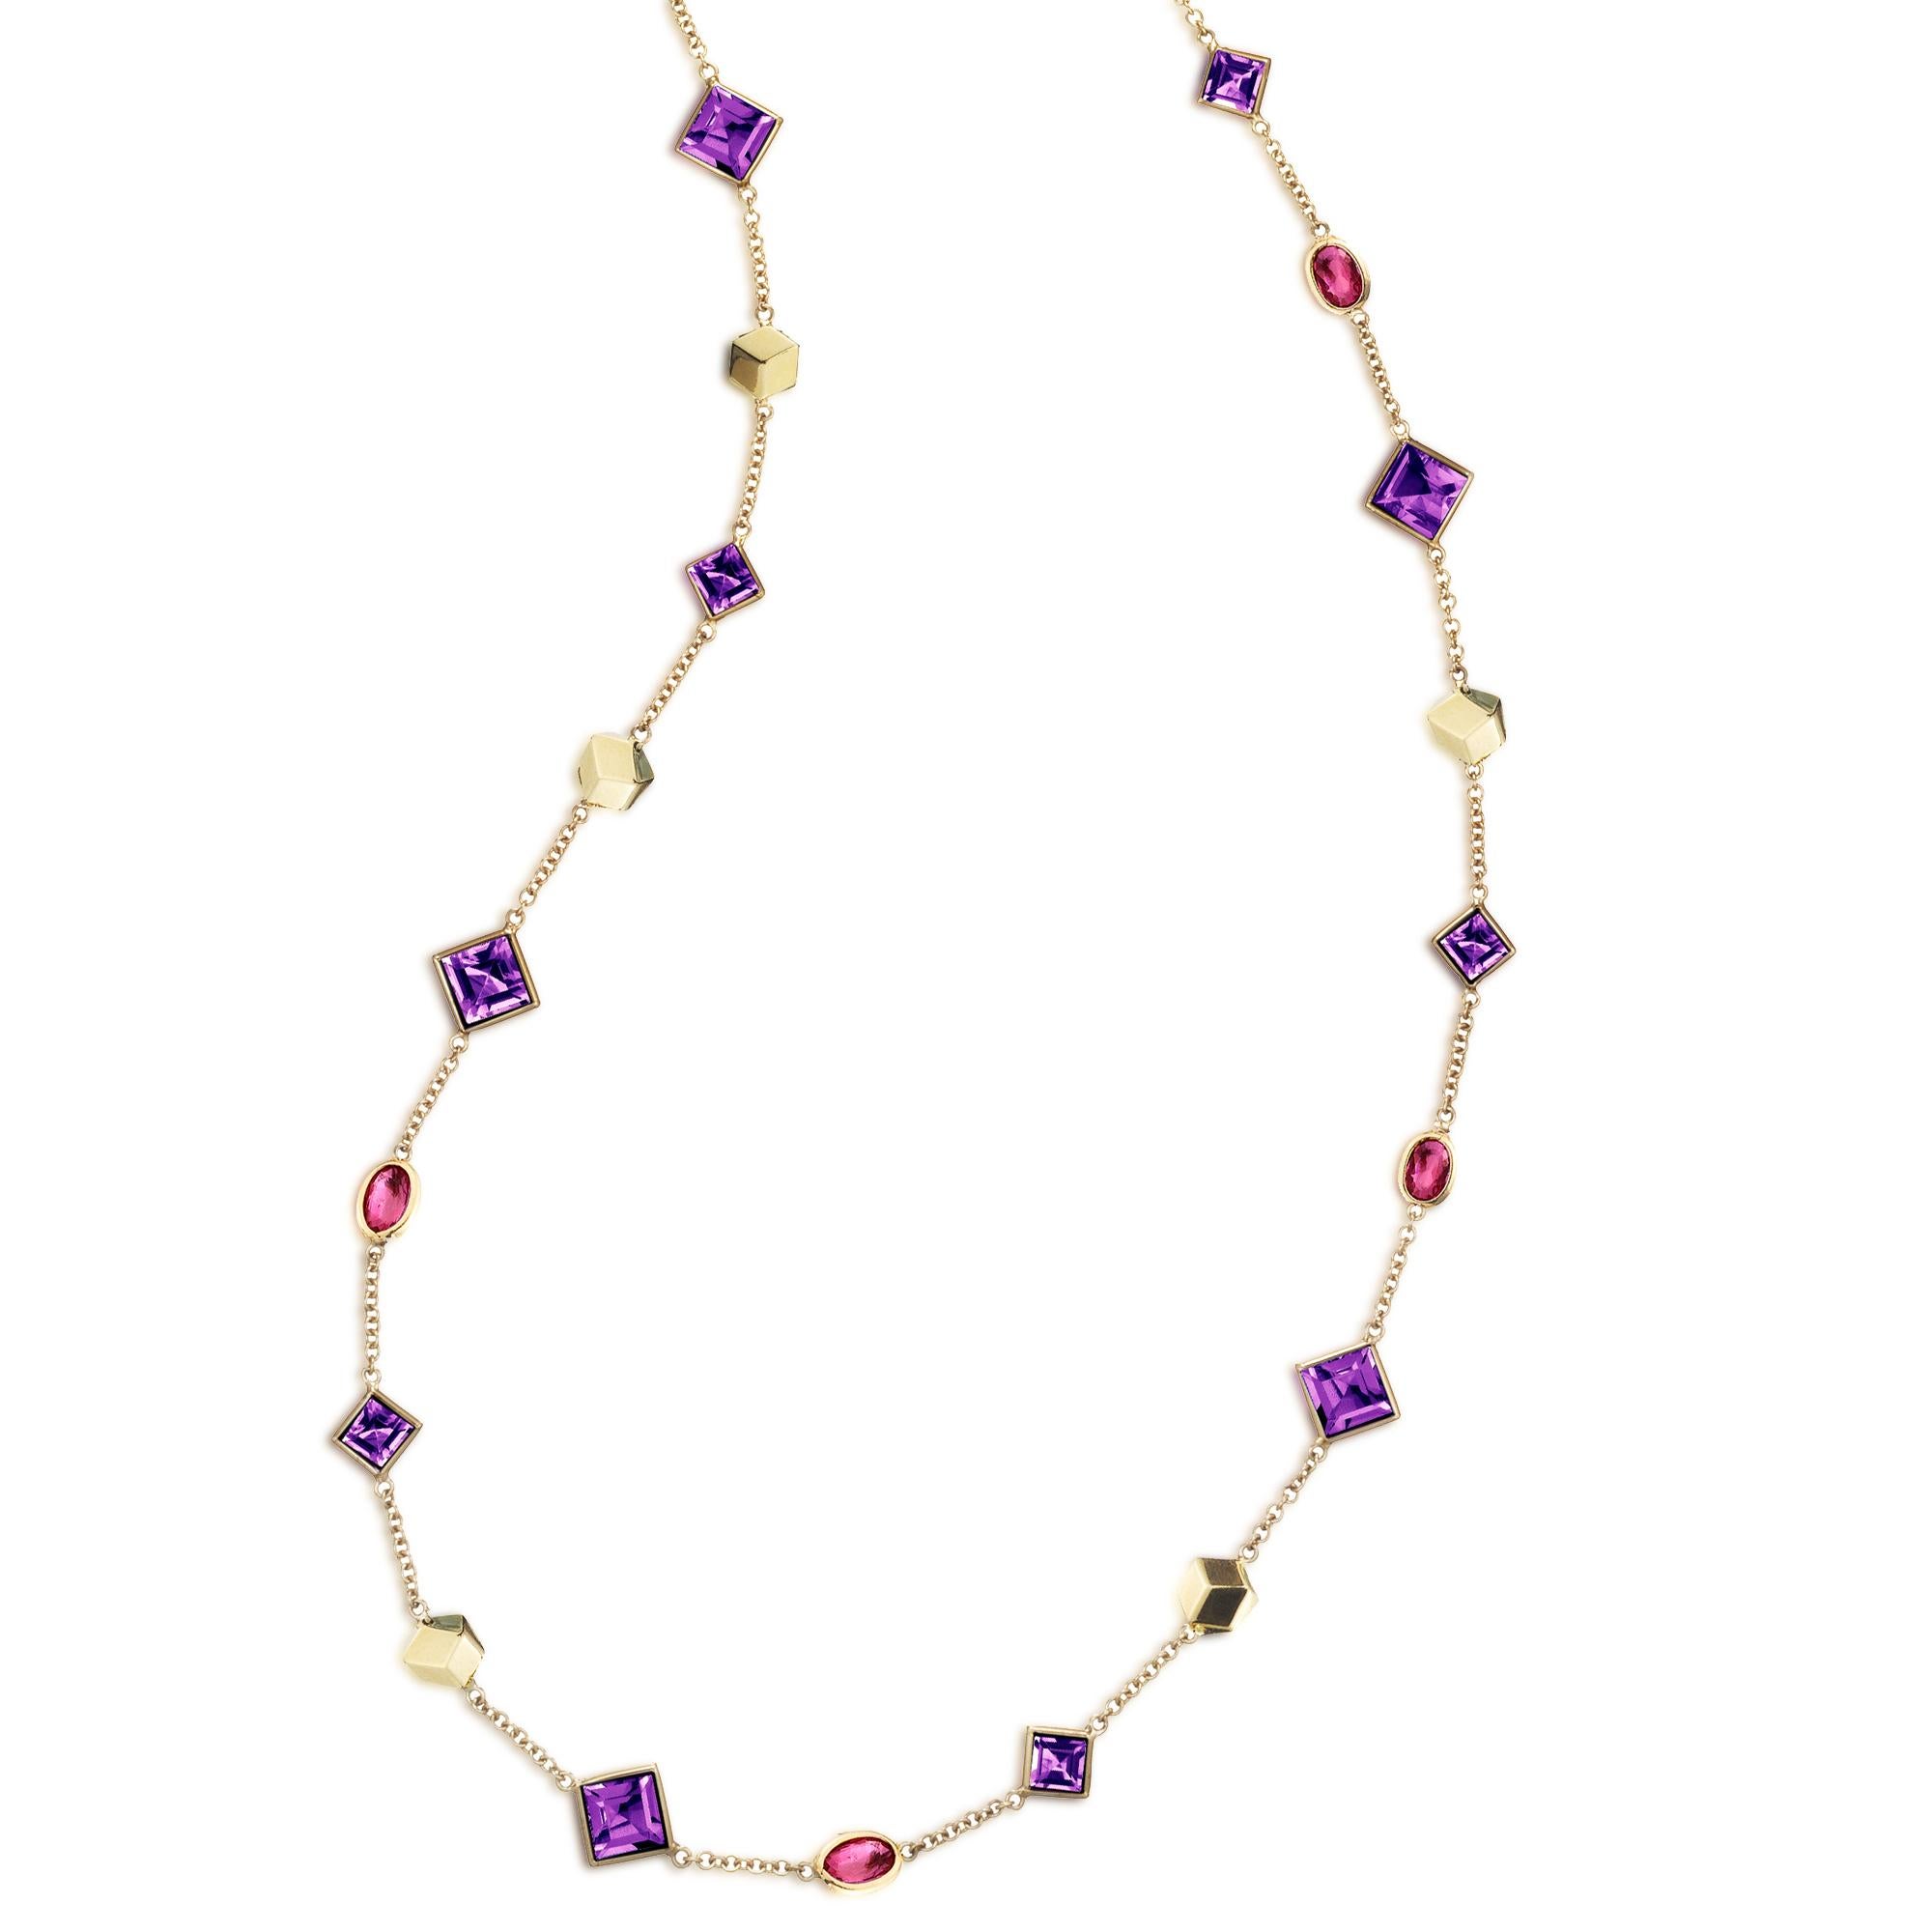 18kt yellow gold Florentine necklace with bezel set emerald-cut amethyst and oval rubies, and signature Brillante® motif.

Inspired by the Garden of the Iris, the Florentine collection pairs bold color combinations of geometric gemstones to